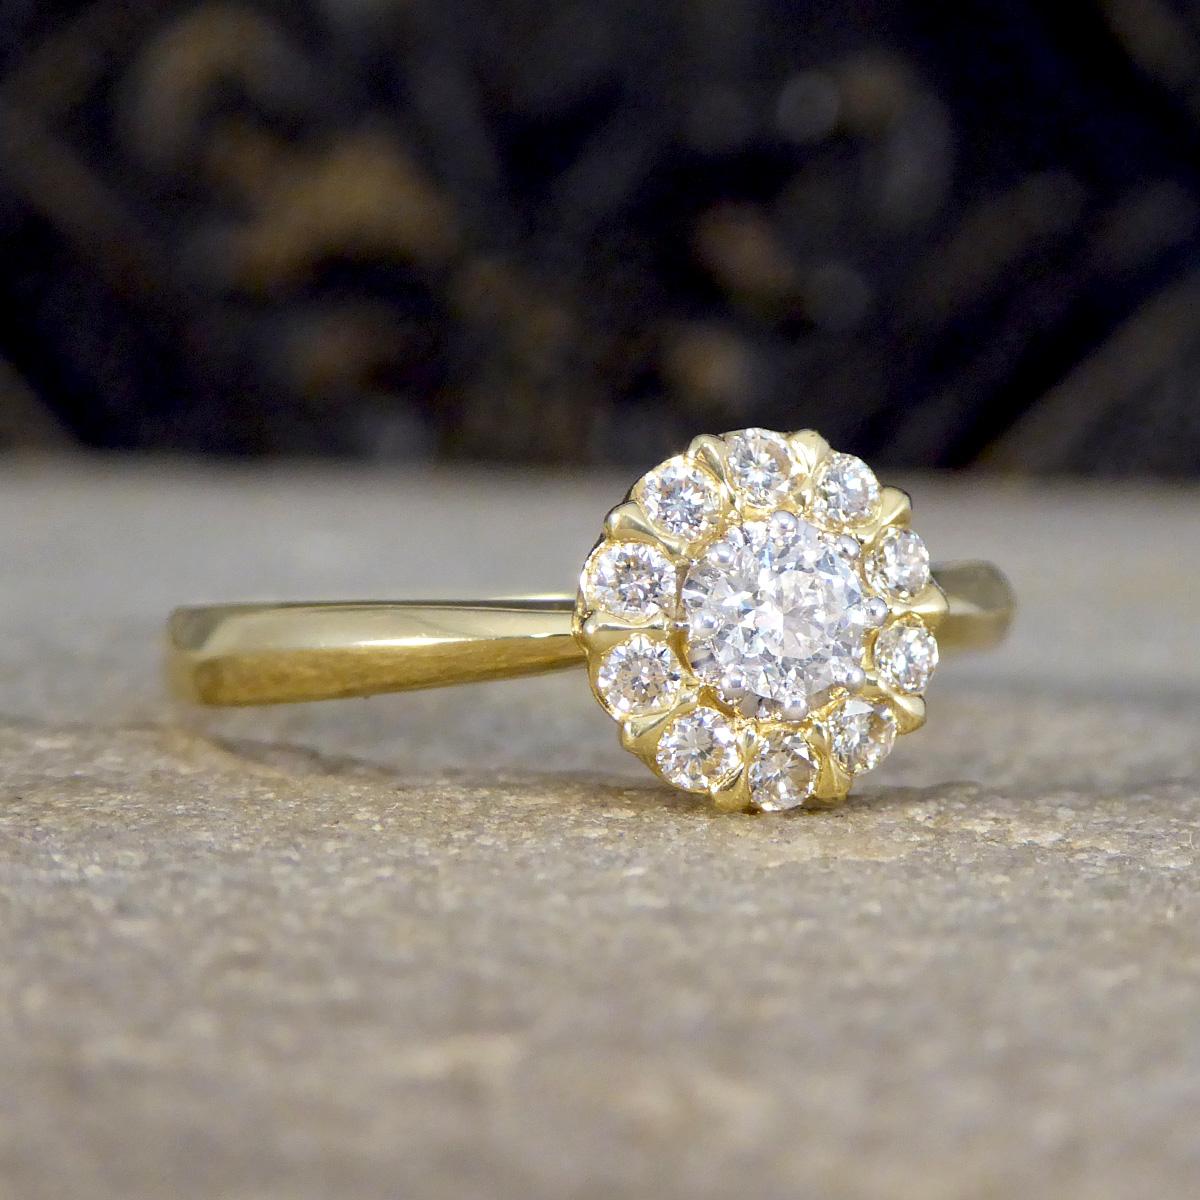 Such a stunning Daisy Diamond cluster ring, a masterpiece of elegance and craftsmanship, set in 18ct Yellow Gold. This ring features a brilliant centre diamond, held securely in place by rhodium-plated claws. The use of rhodium not only adds